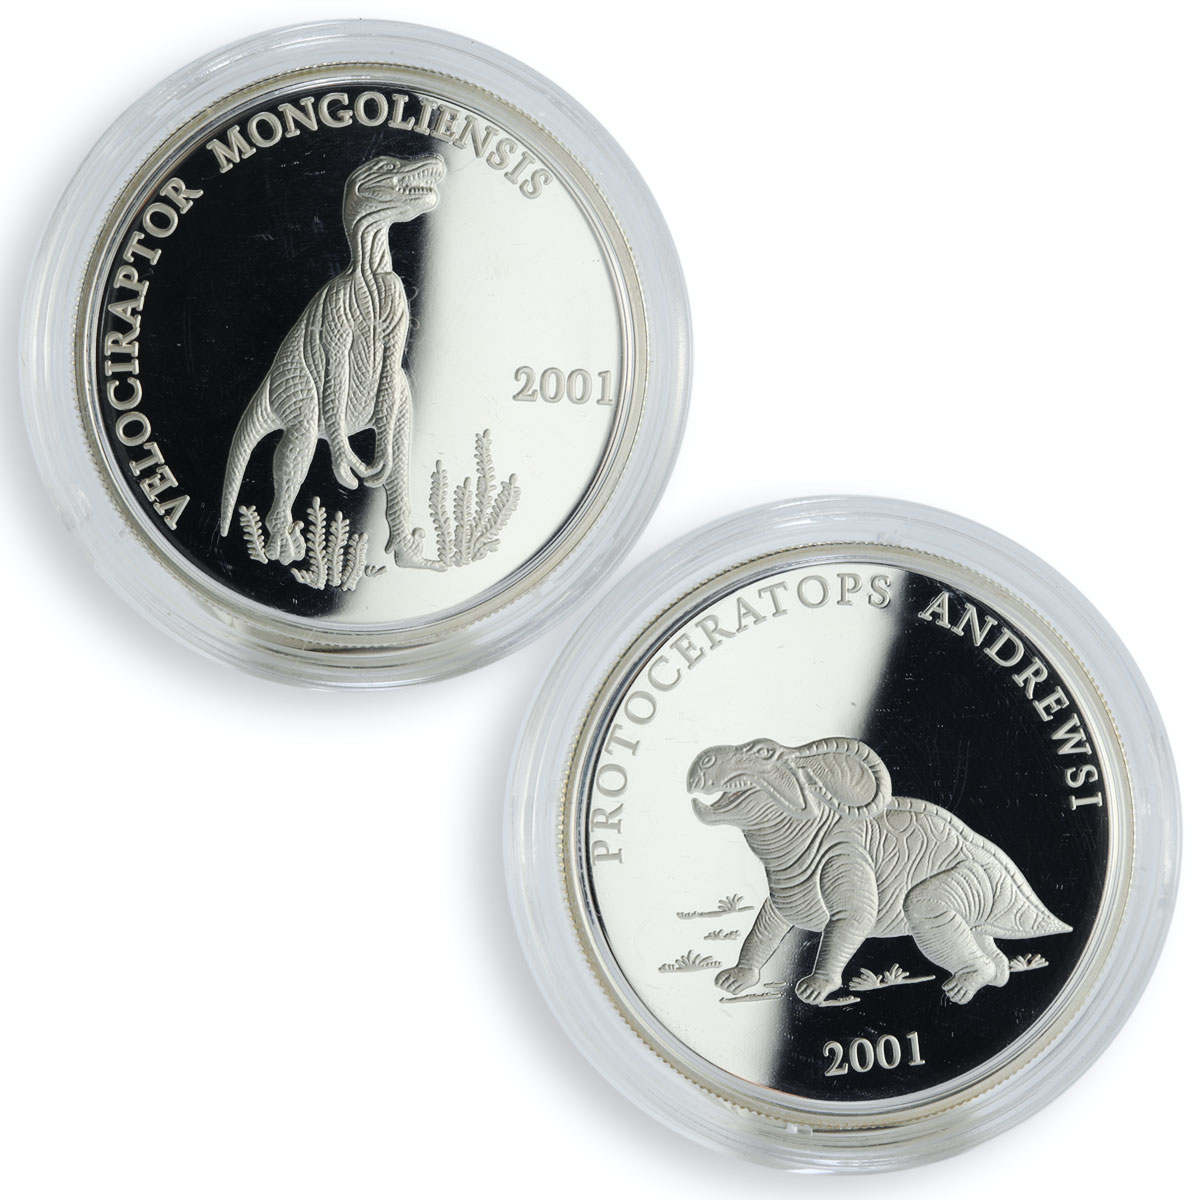 Mongolia set 2 coins Dinosaurs Series proof silver 2001